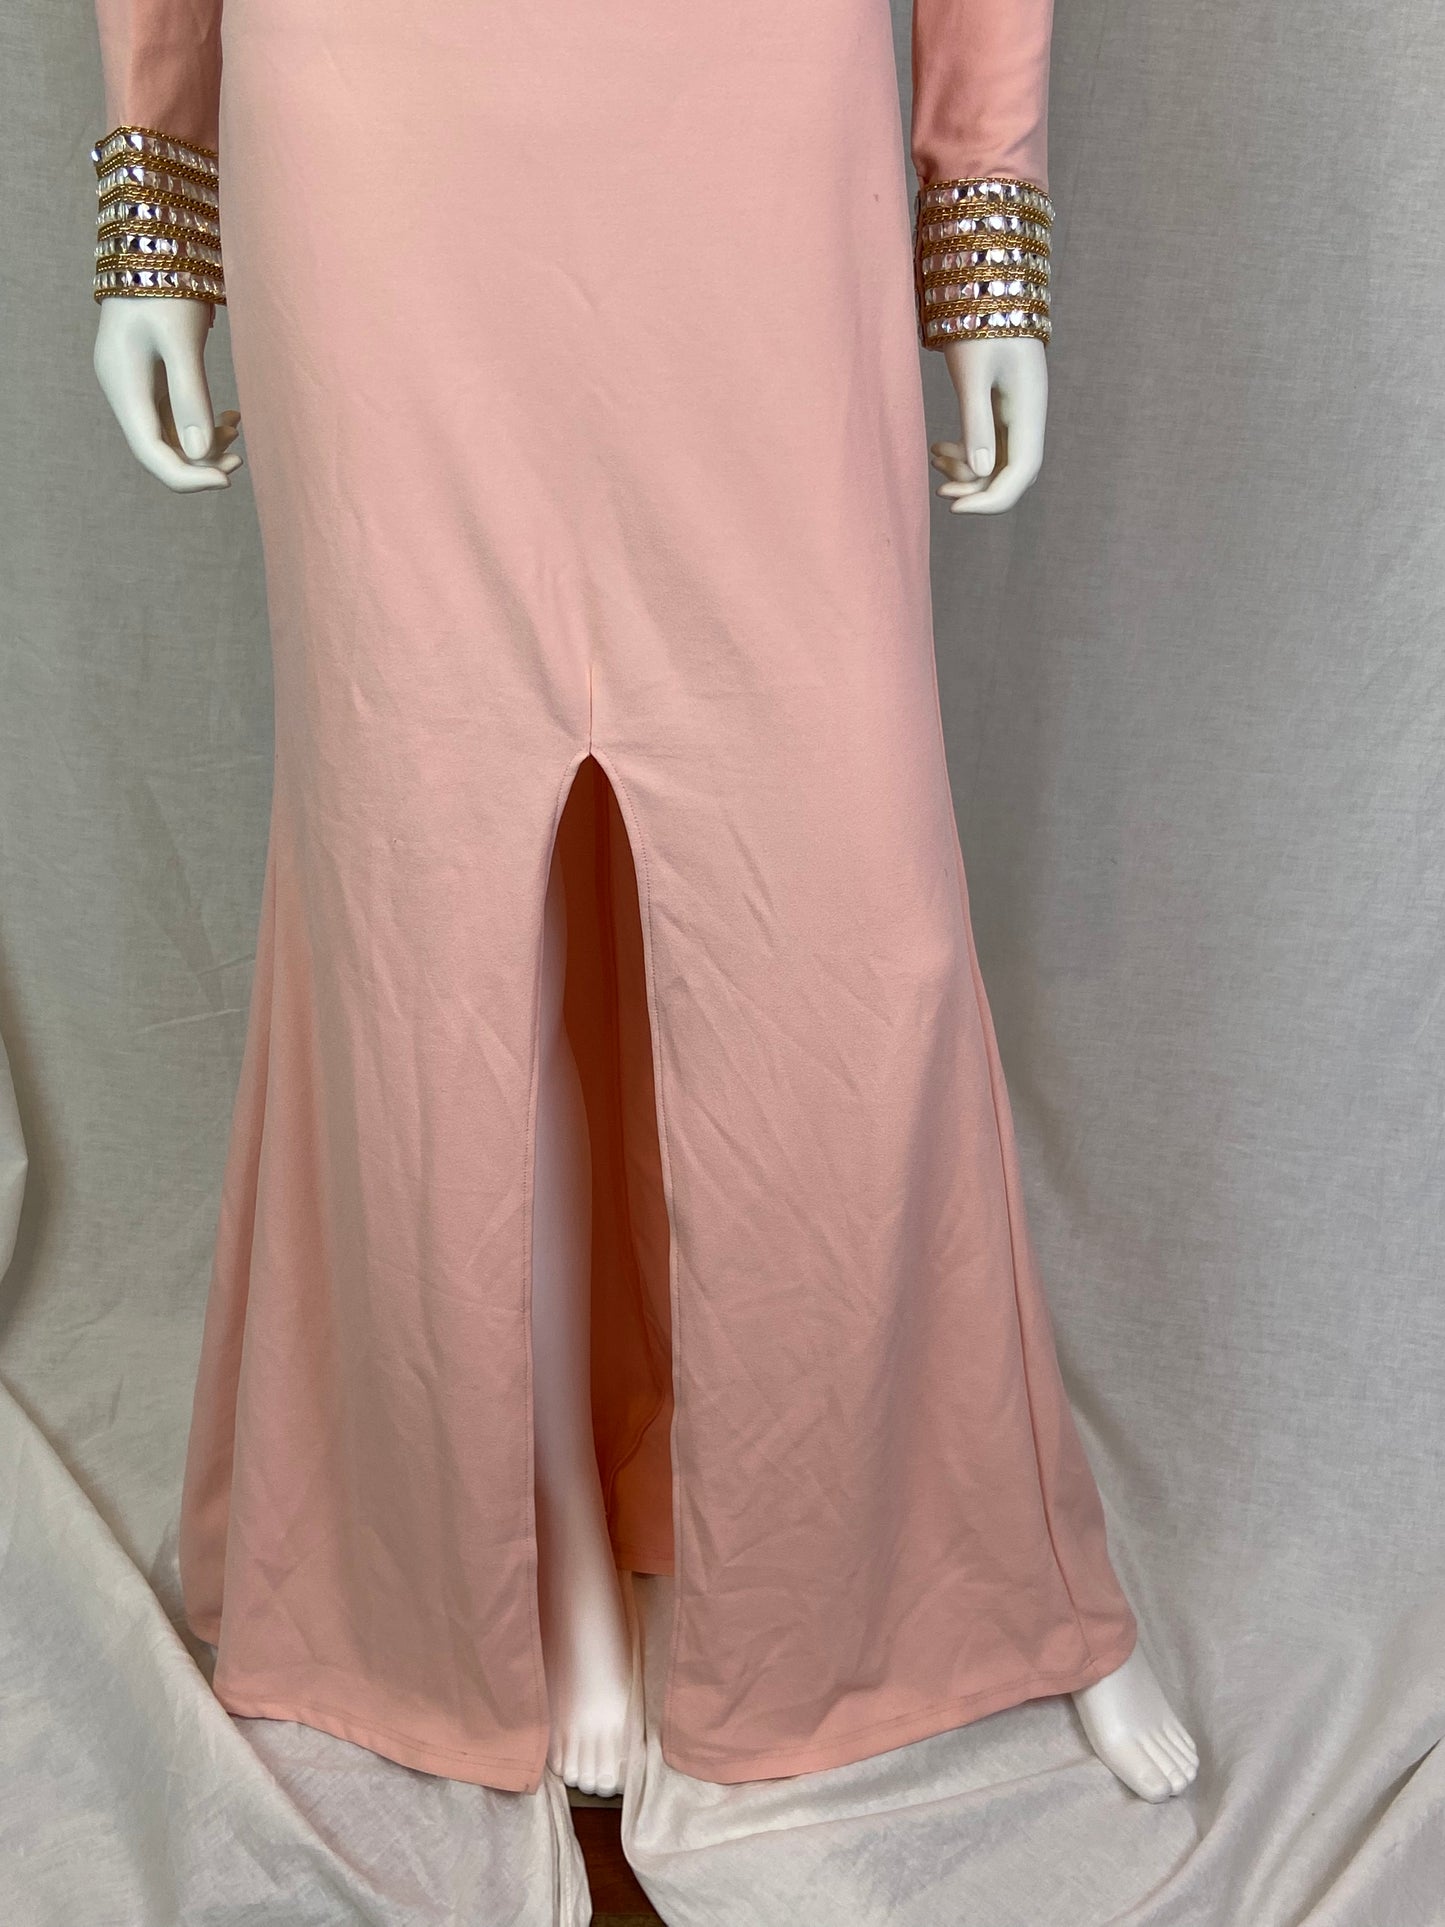 New Windsor Long Pink Beaded Gown Dress